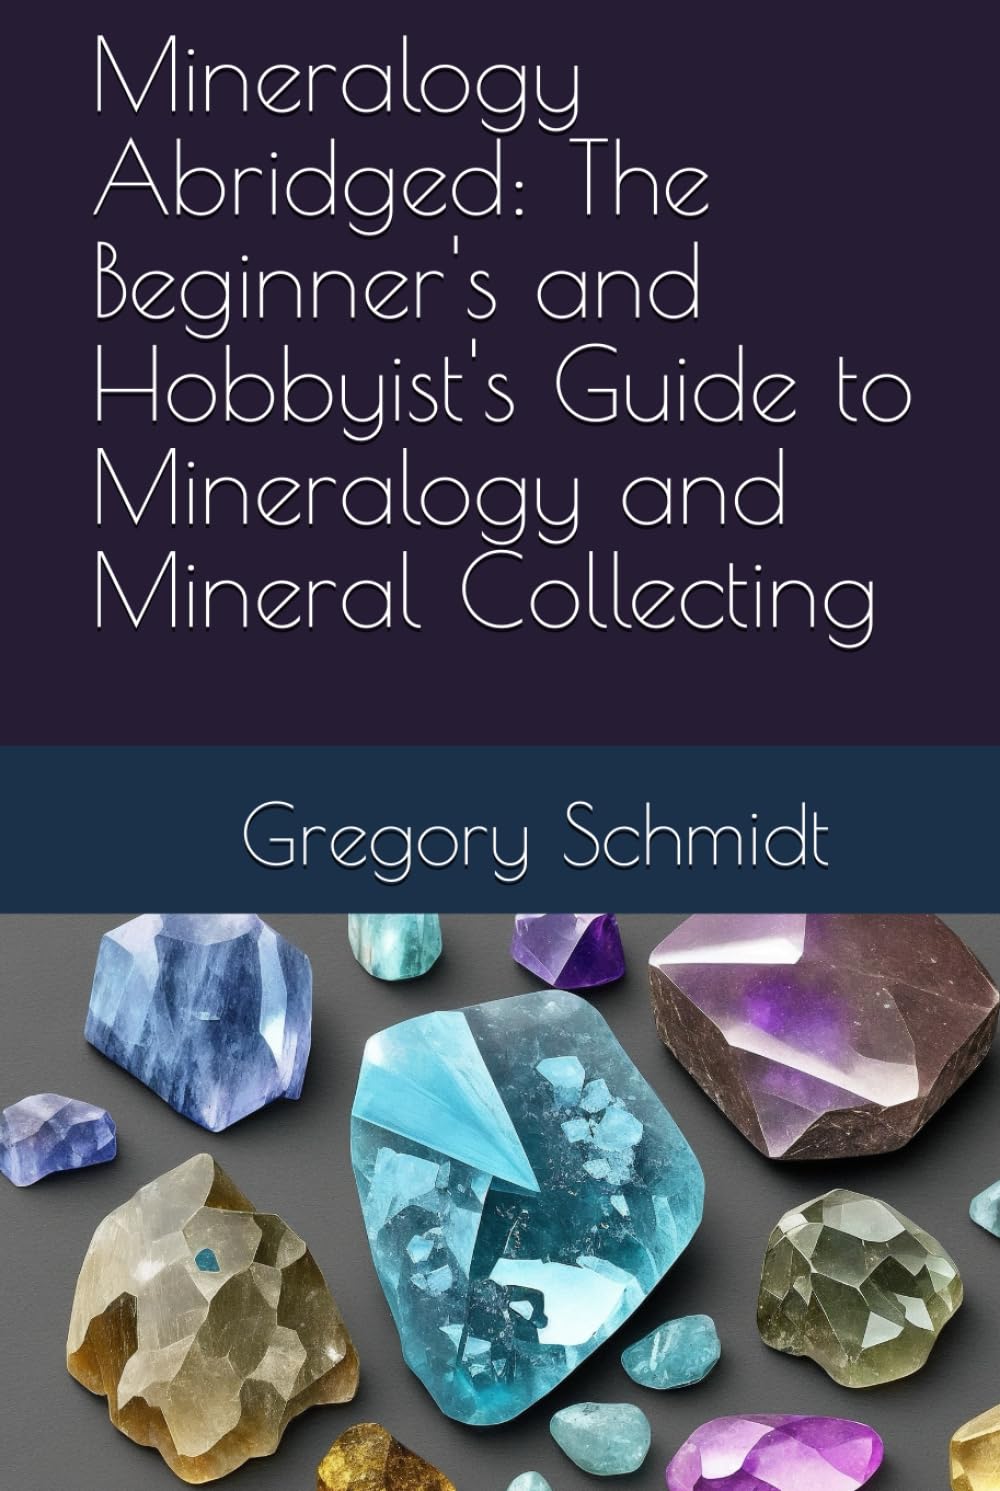 Mineralogy Abridged: The Beginner's and Hobbyist's Guide to Mineralogy and Mineral Collecting